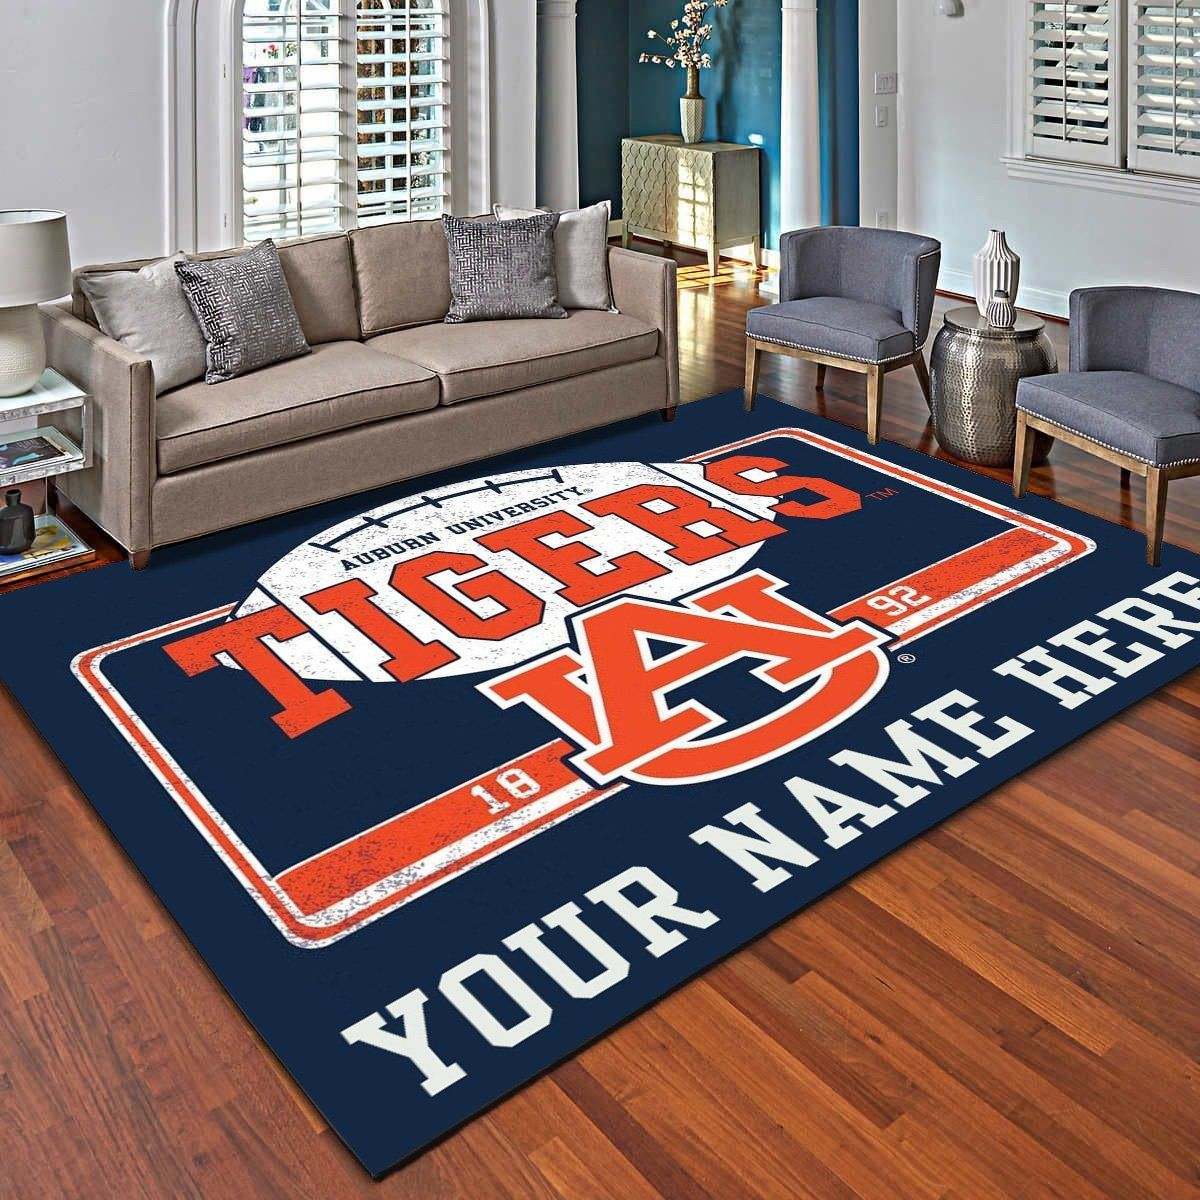 Auburn Tigers Personalized Area Rugs, Living Room Carpet – Customized Man Cave Floor Mat